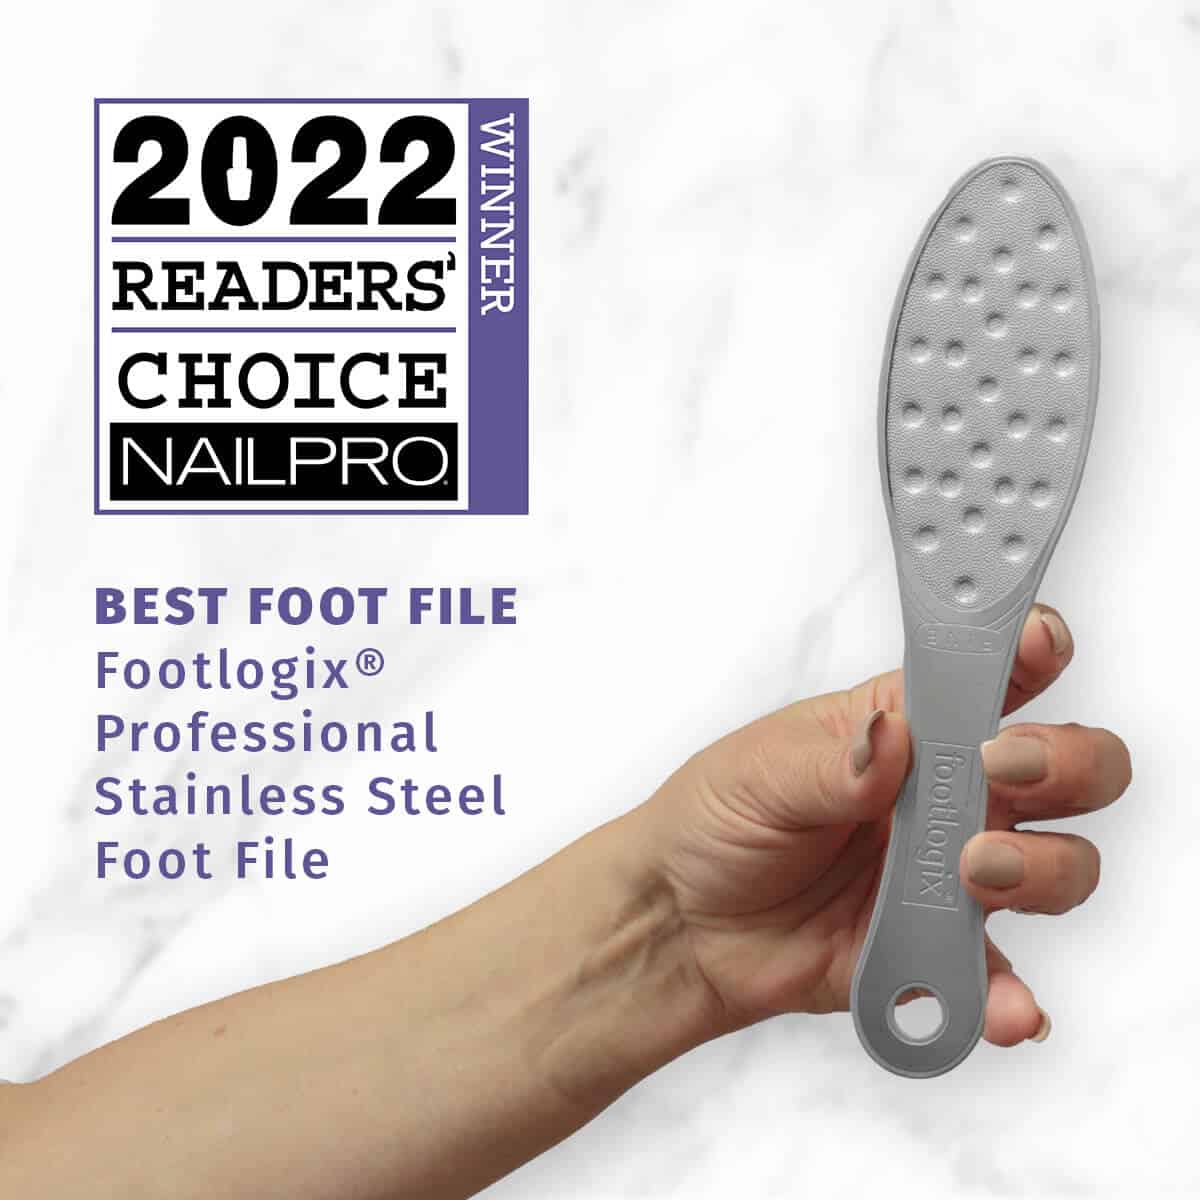 KG Connections - Professional Foot Care Products from Footlogix